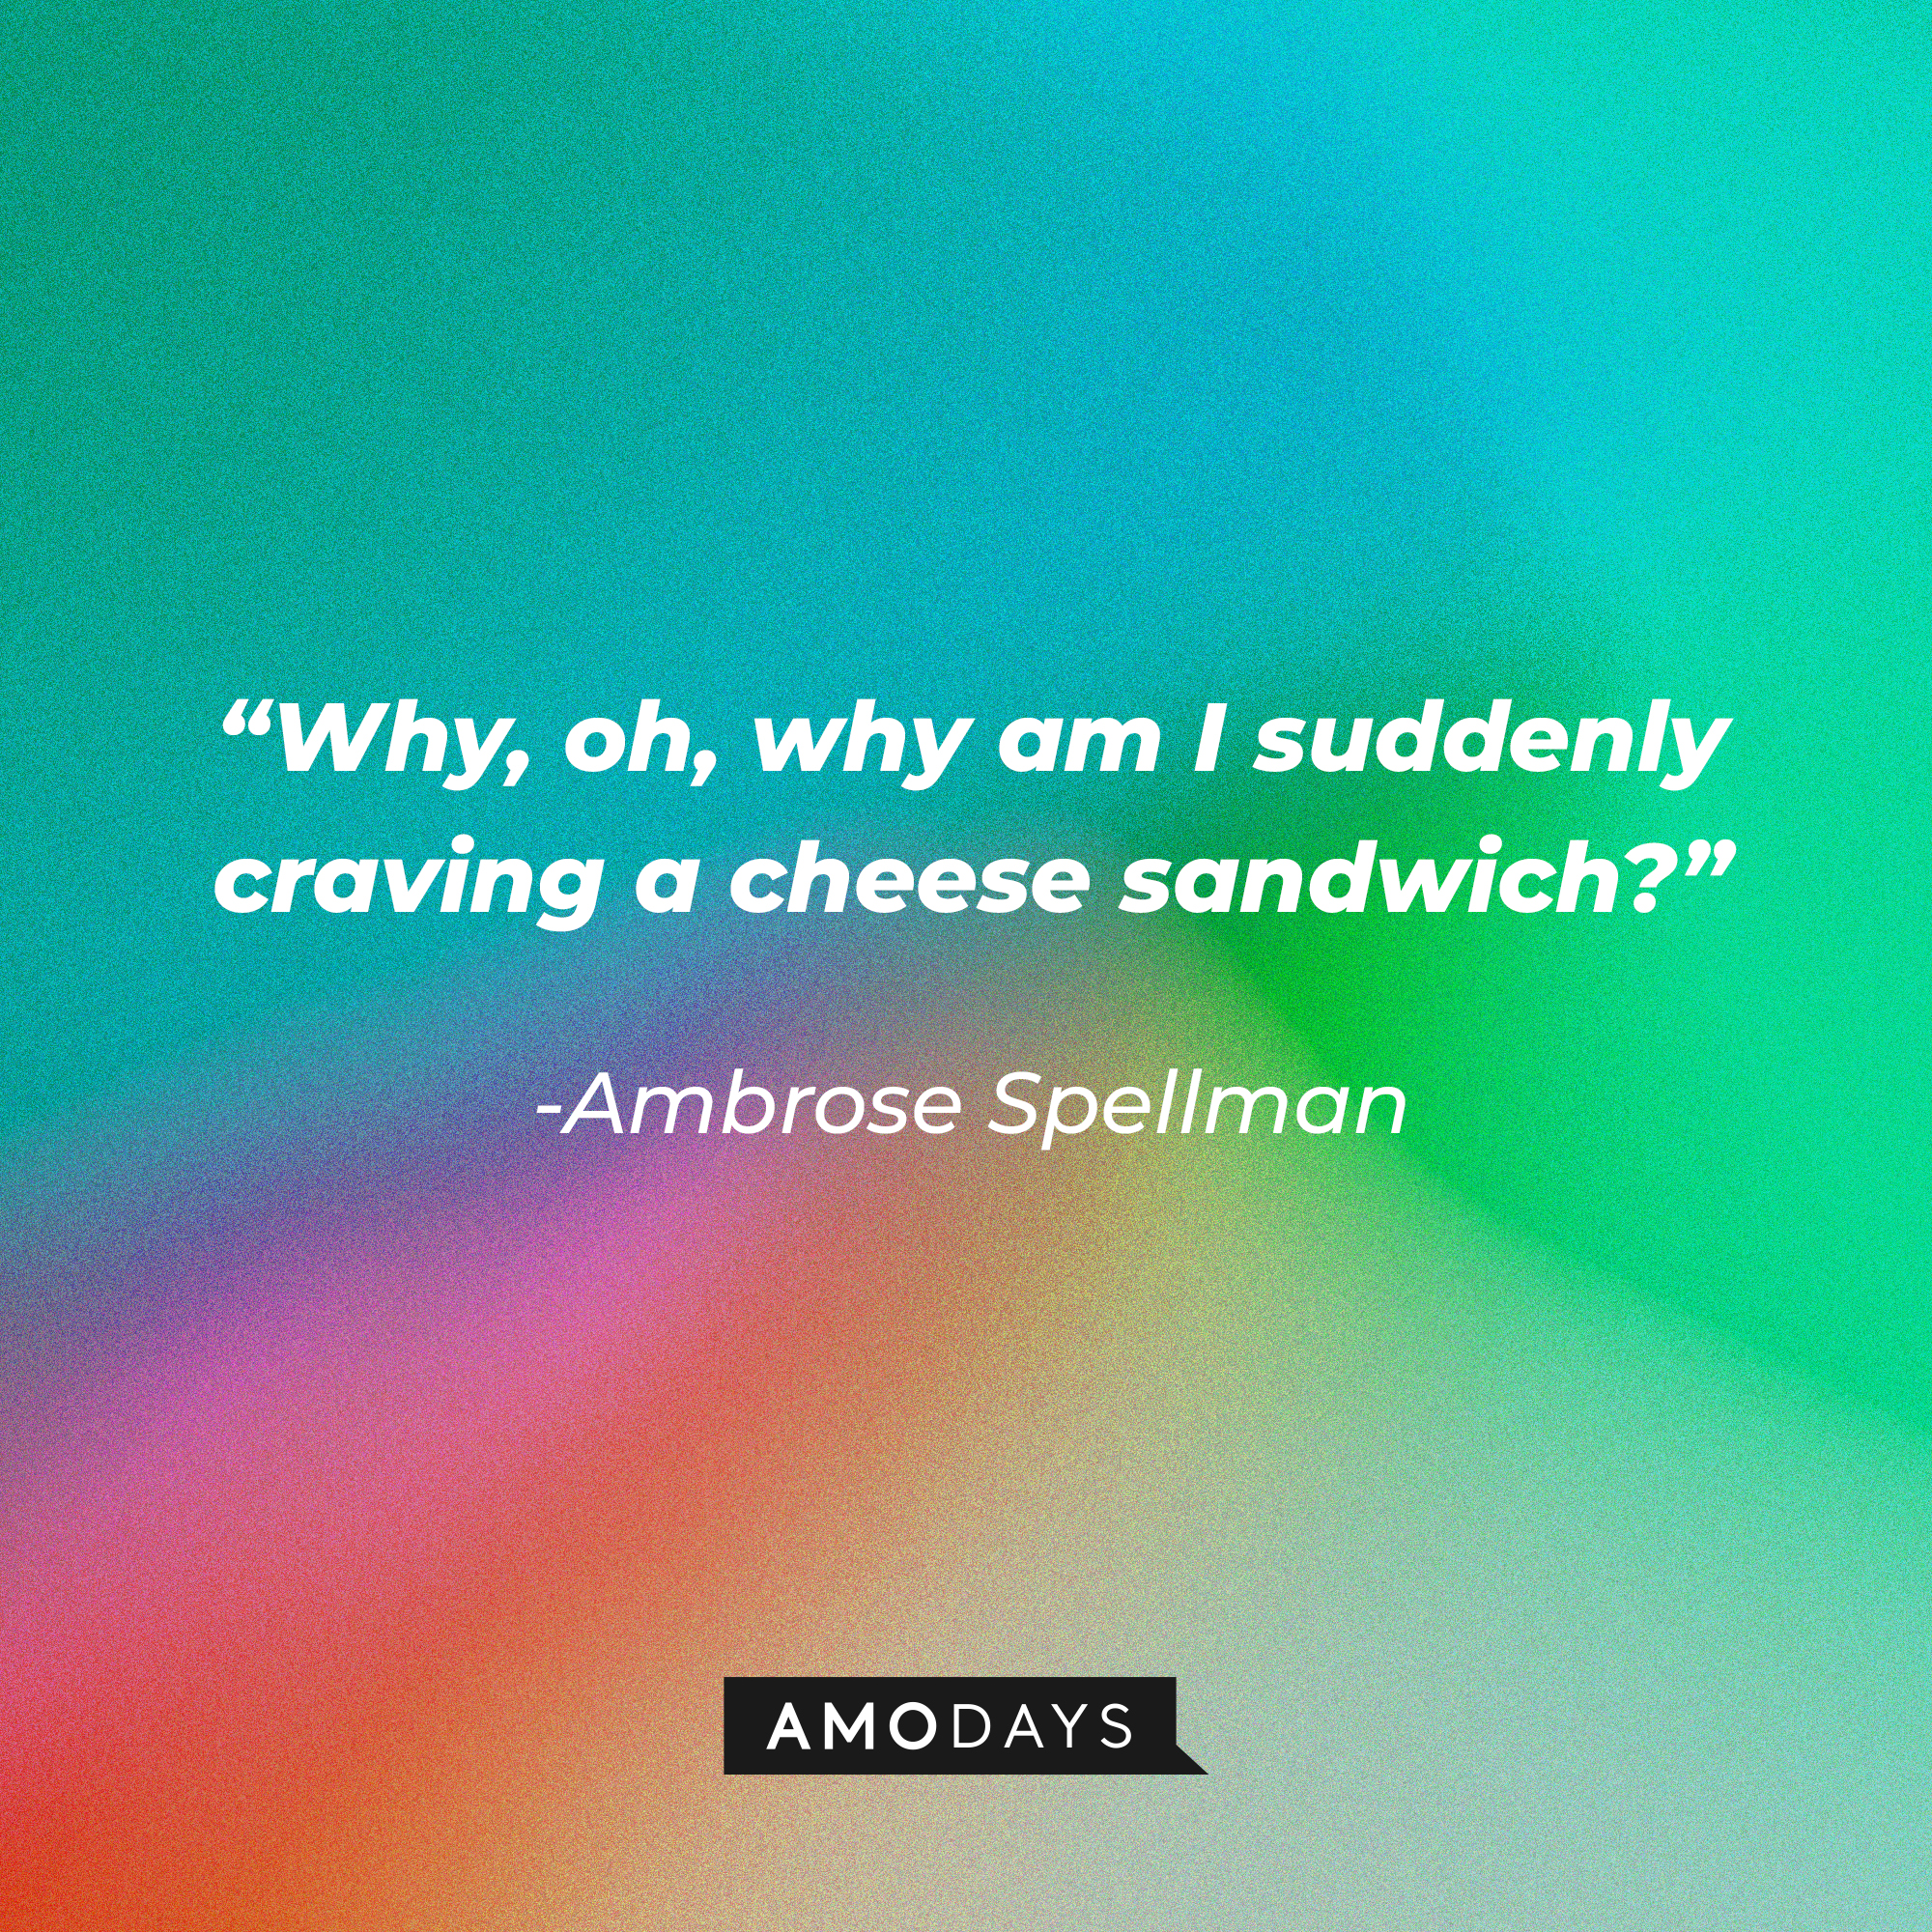 Ambrose Spellman's quote: “Why, oh, why am I suddenly craving a cheese sandwich?” | Source: Amodays